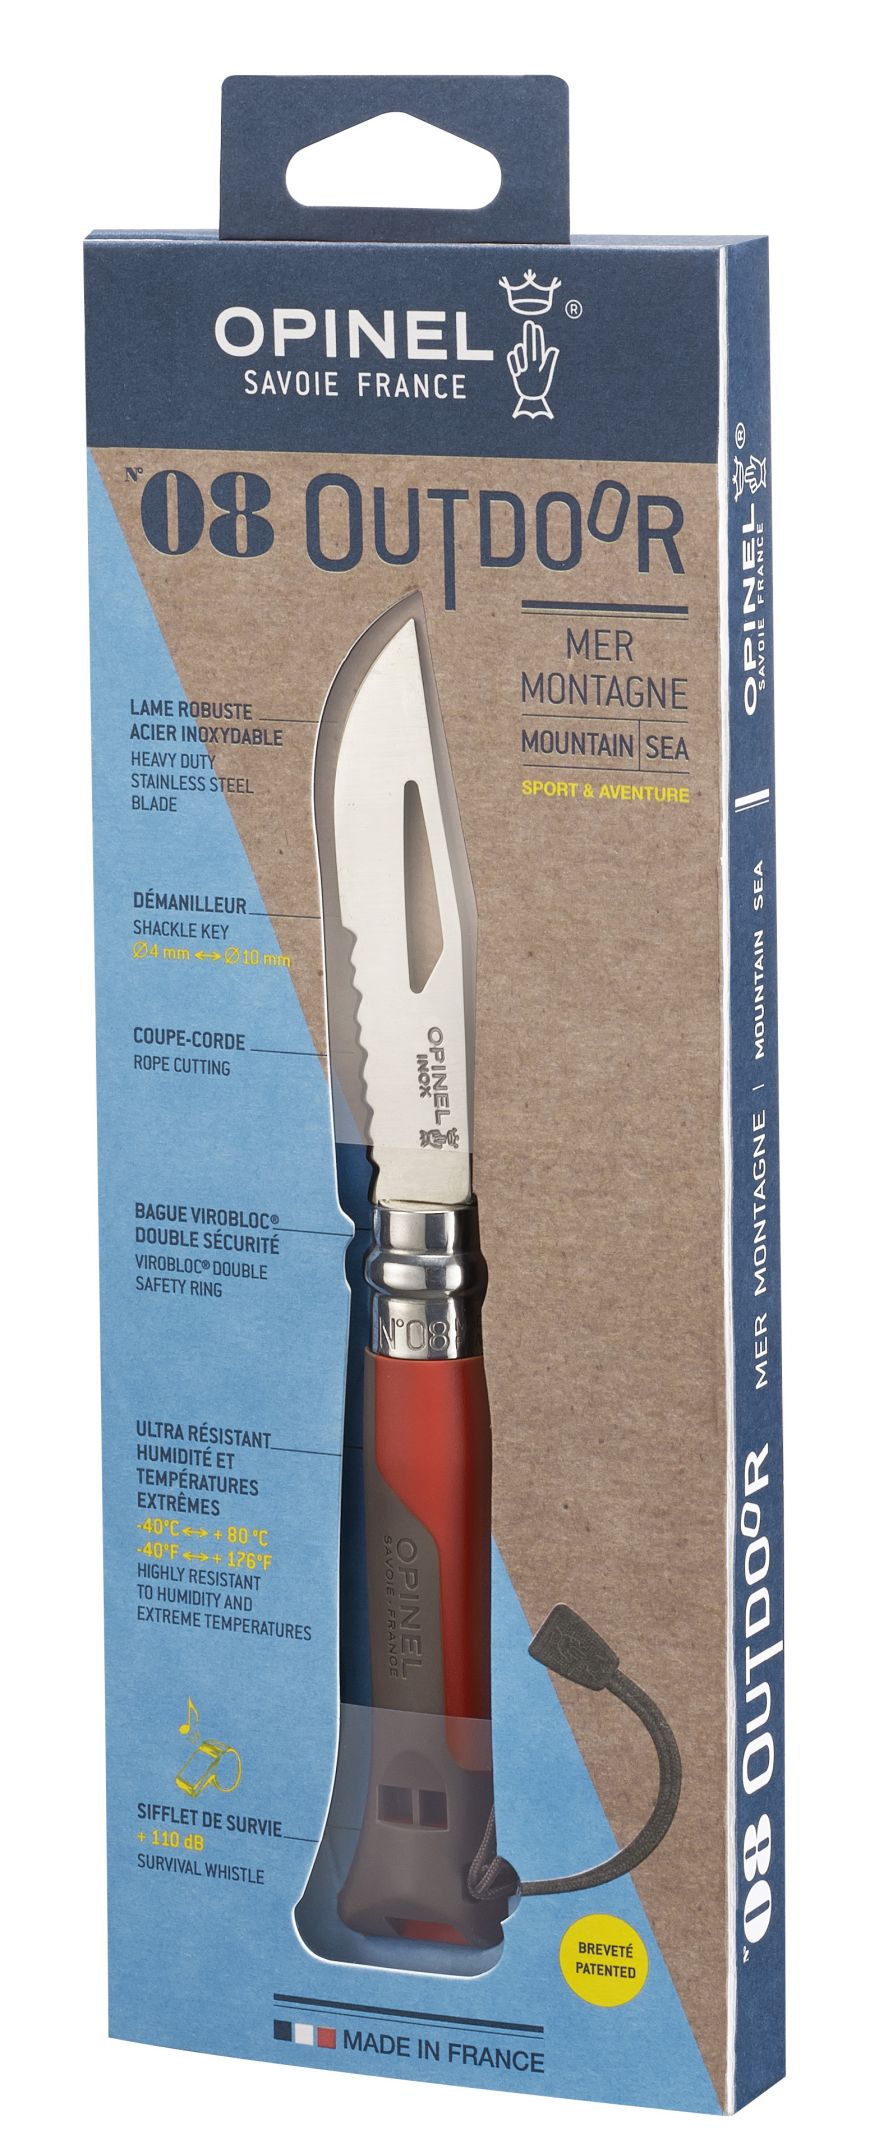 Couteau OPINEL N°08 Outdoor mer/montagne